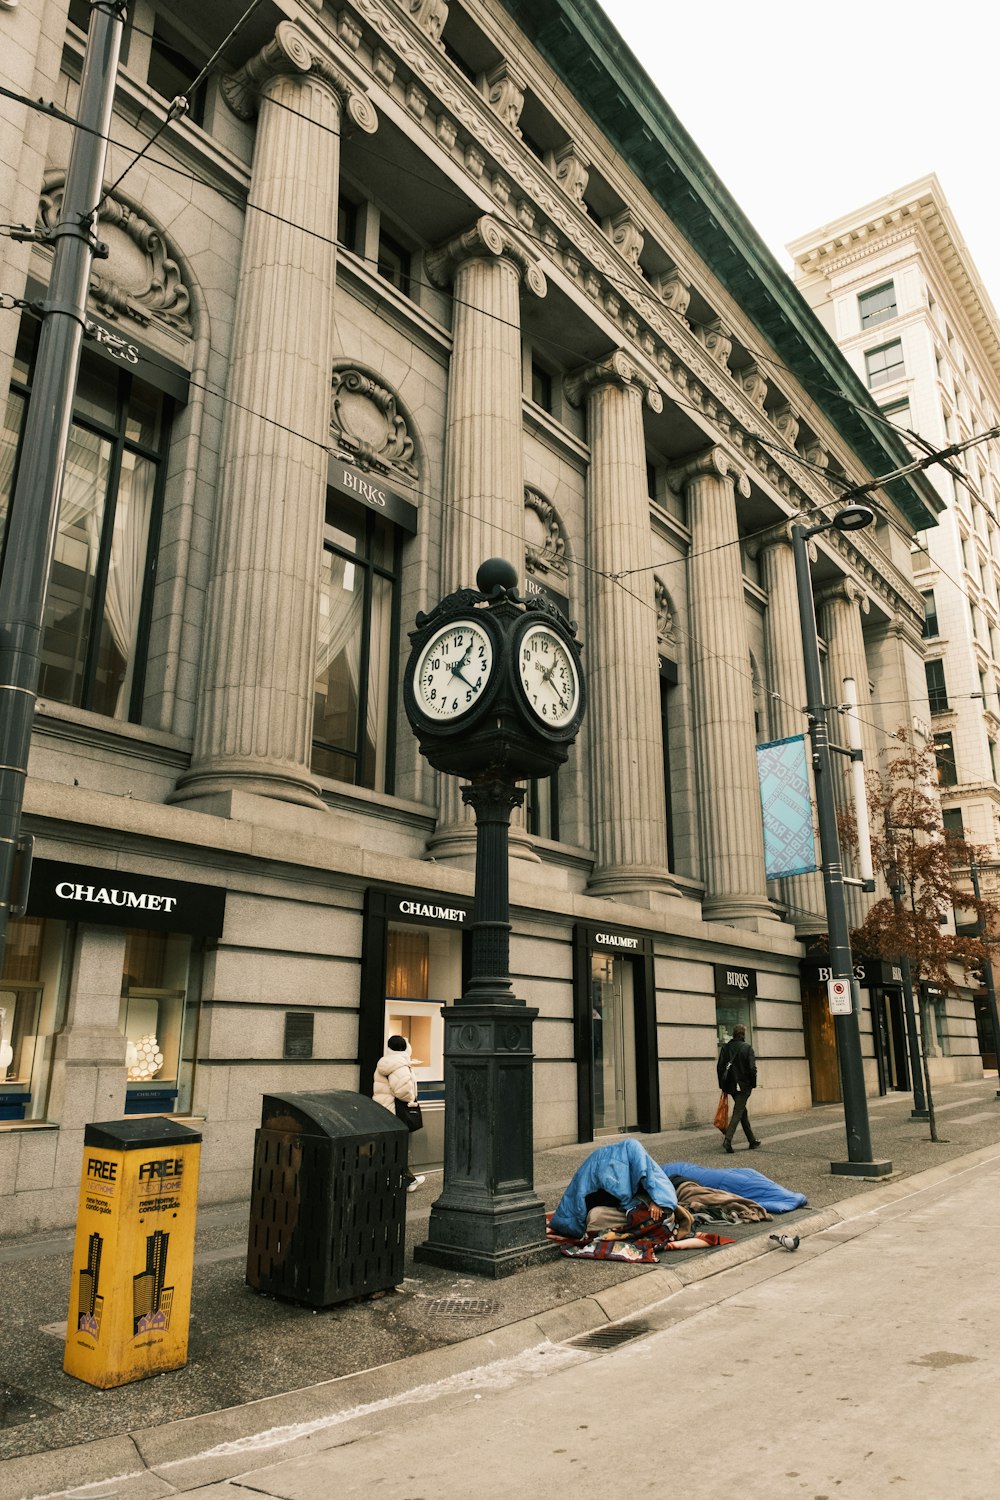 a clock on a pole in front of a building